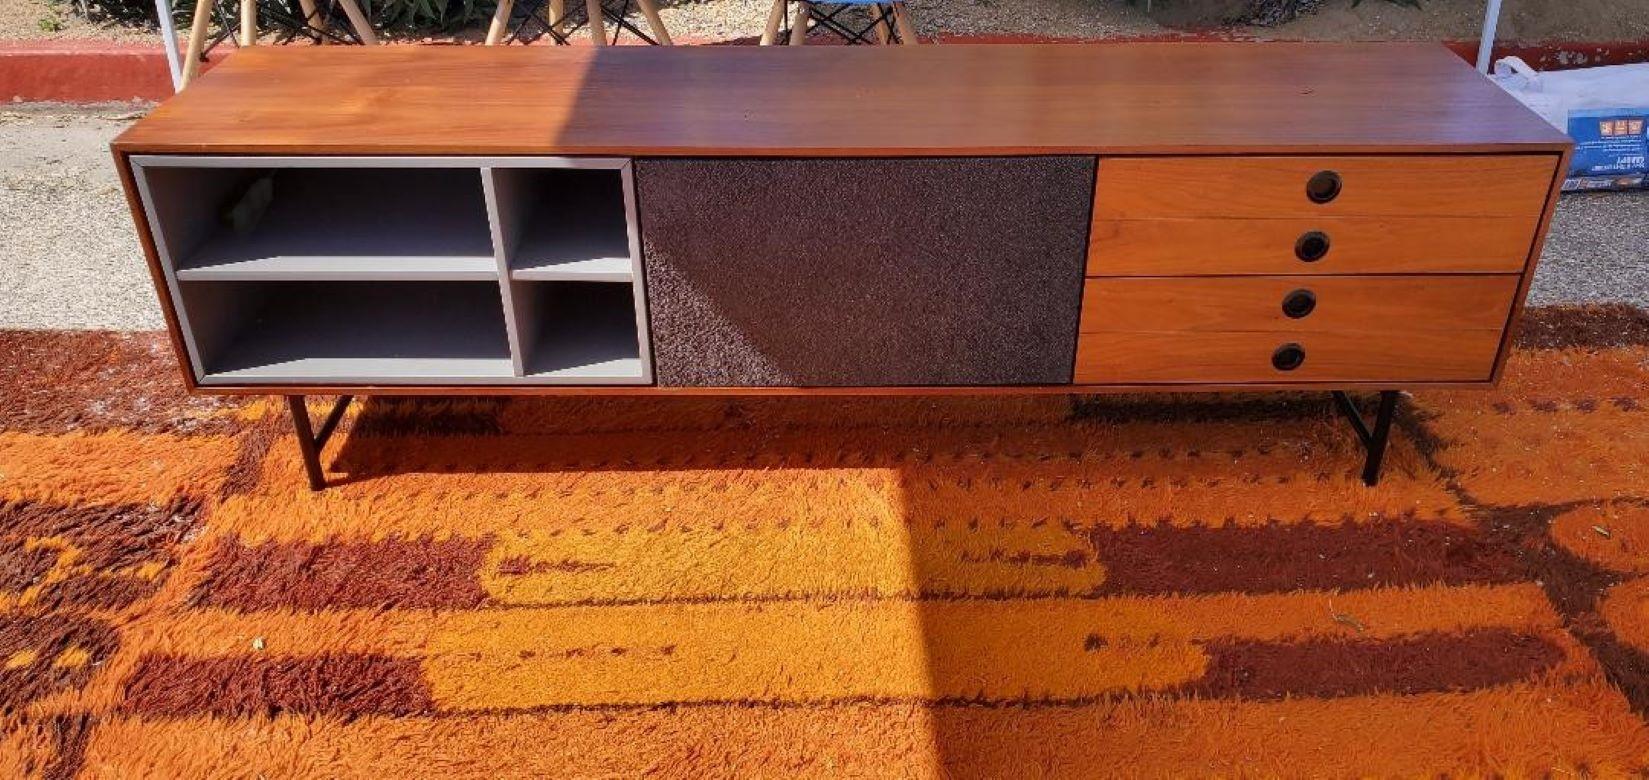 Beautiful Walnut Credenza. Iconic Mid Century Modern Cabinet Design. This Walnut Piece Makes Practical And Effective Storage Use In Any Room In The Home, Office Or Studio.
Beautiful Walnut Cabinet, Black Sleek Metal Legs. Swing Open Door